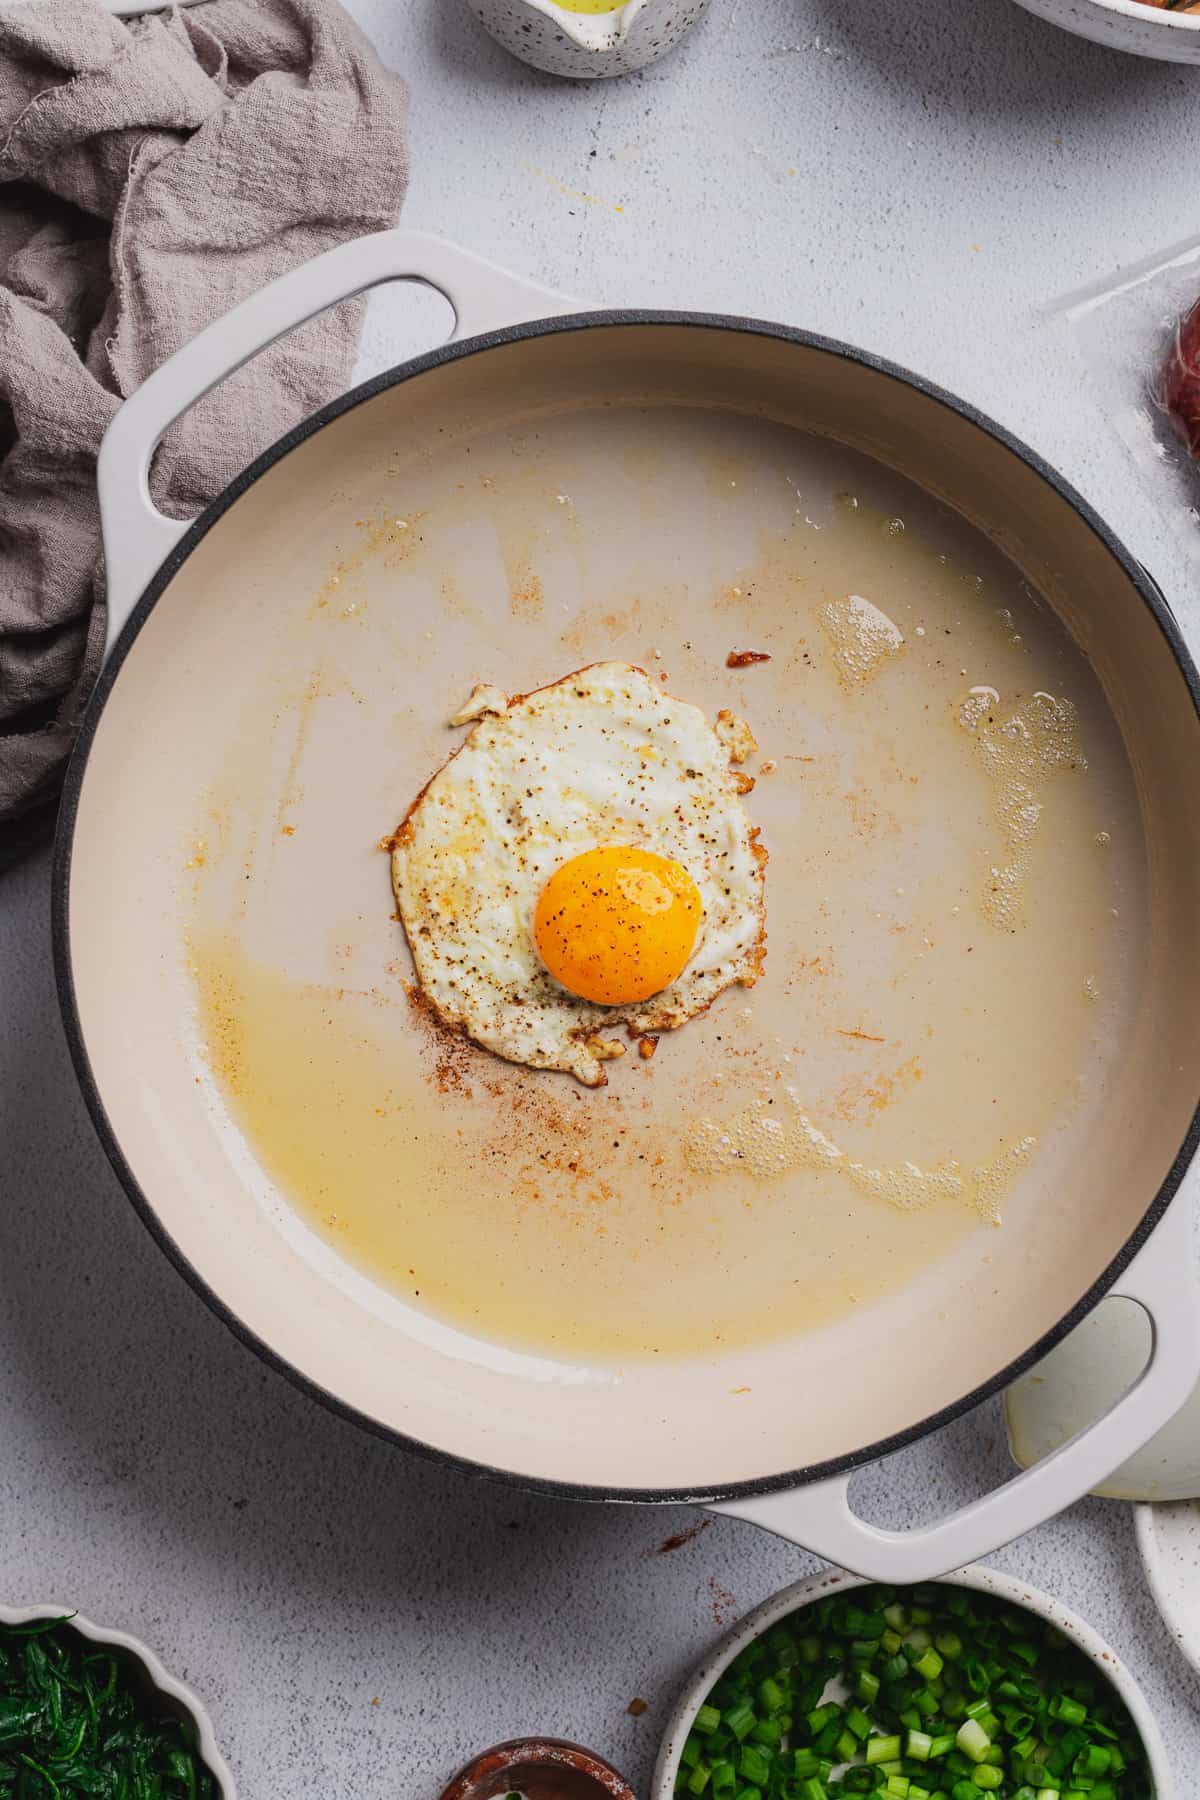 fried egg cooked in butter in an enameled cast iron